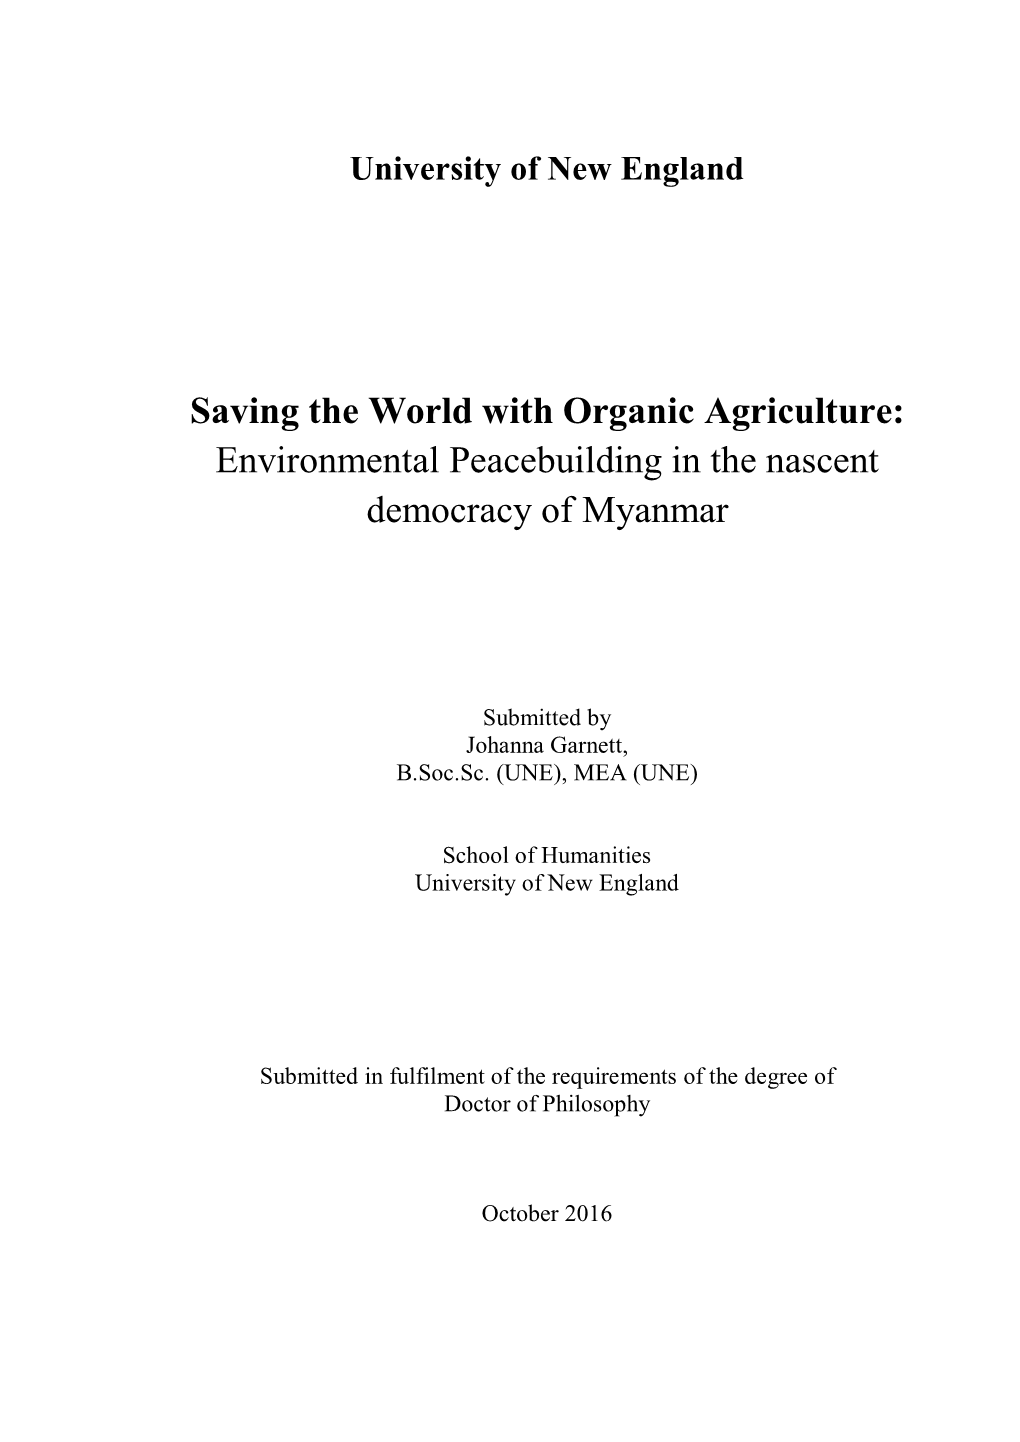 Saving the World with Organic Agriculture: Environmental Peacebuilding in the Nascent Democracy of Myanmar